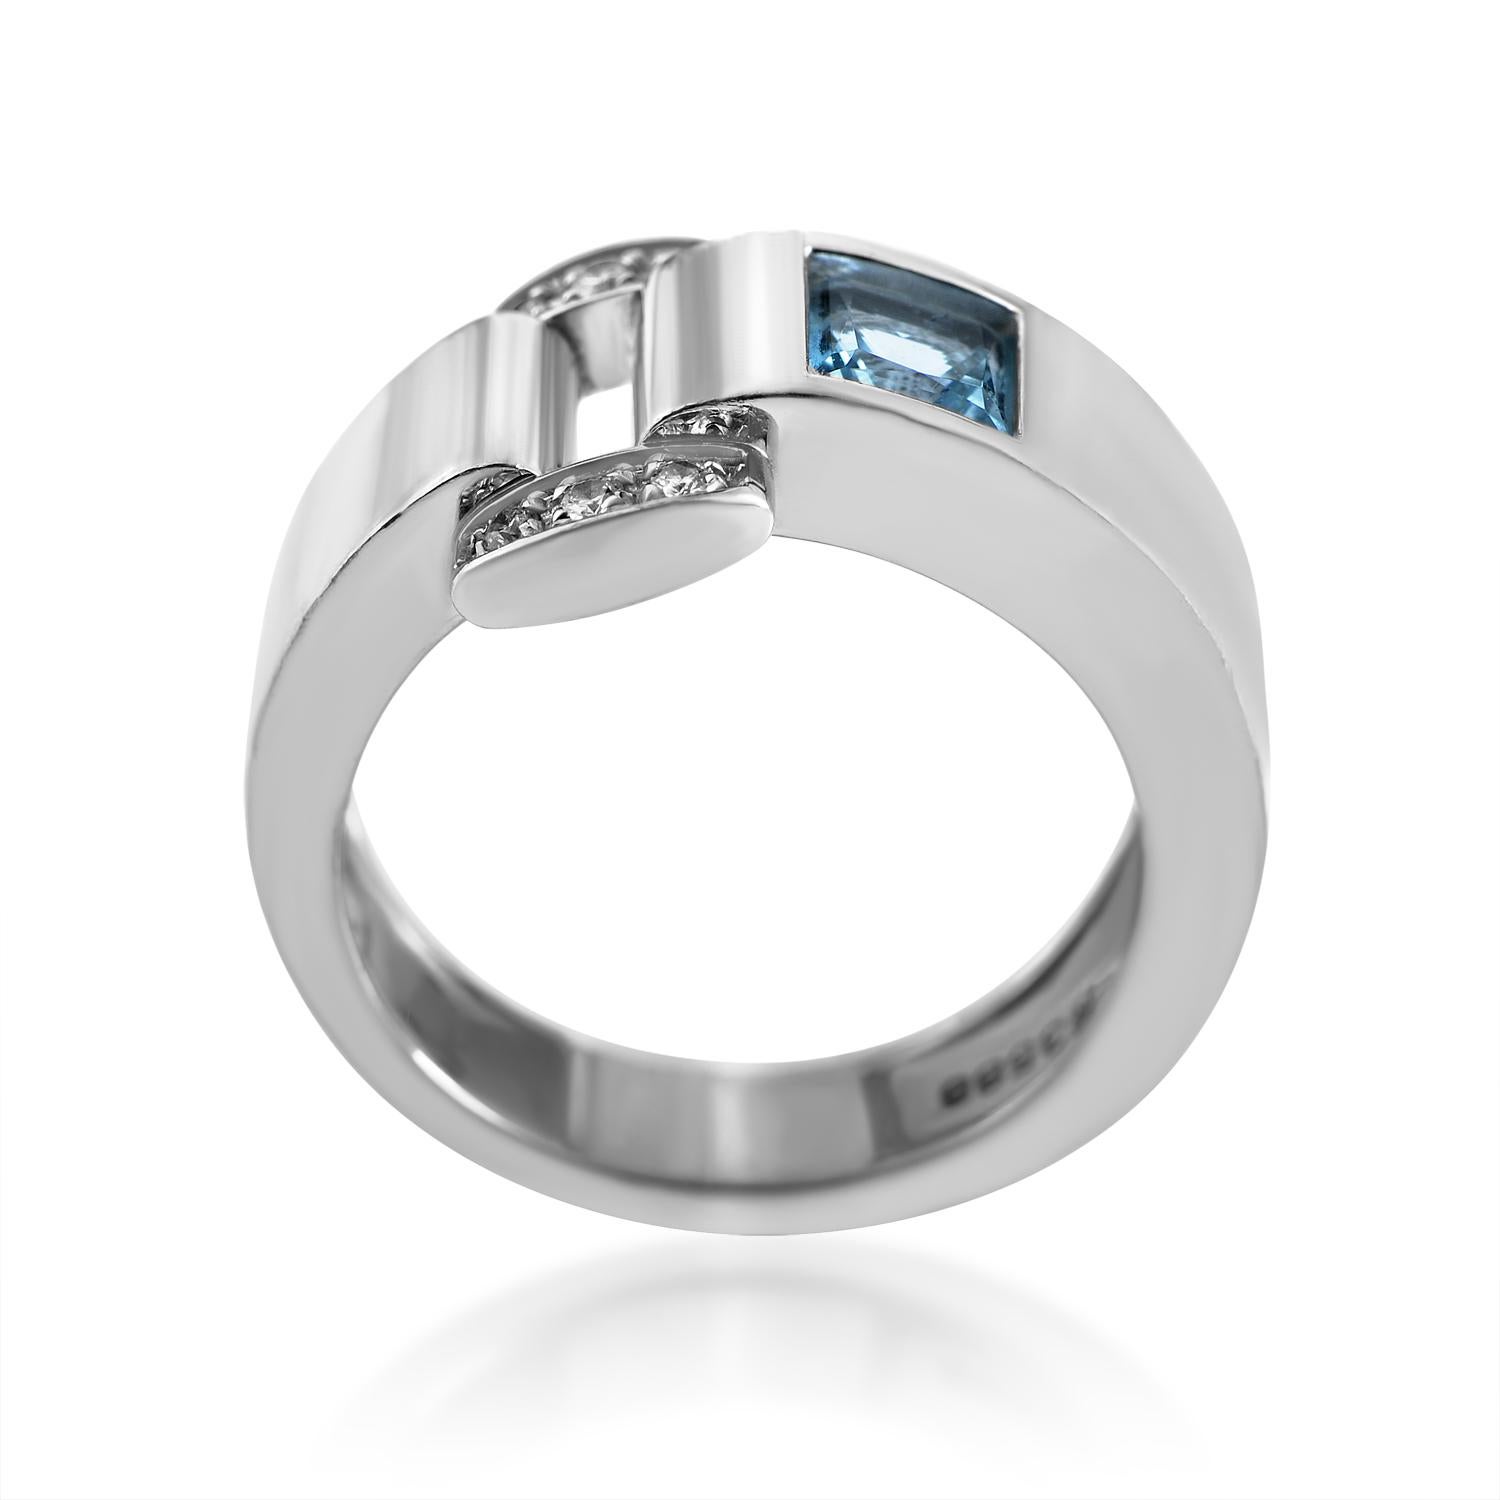 Piaget's Miss Protocole collection is renowned for its Sassy and sensual designs. This ring from the collection is made of 18K white gold and features a buckle-shaped accent set with .07ct of diamonds. Lastly, next to the buckle is a blue topaz